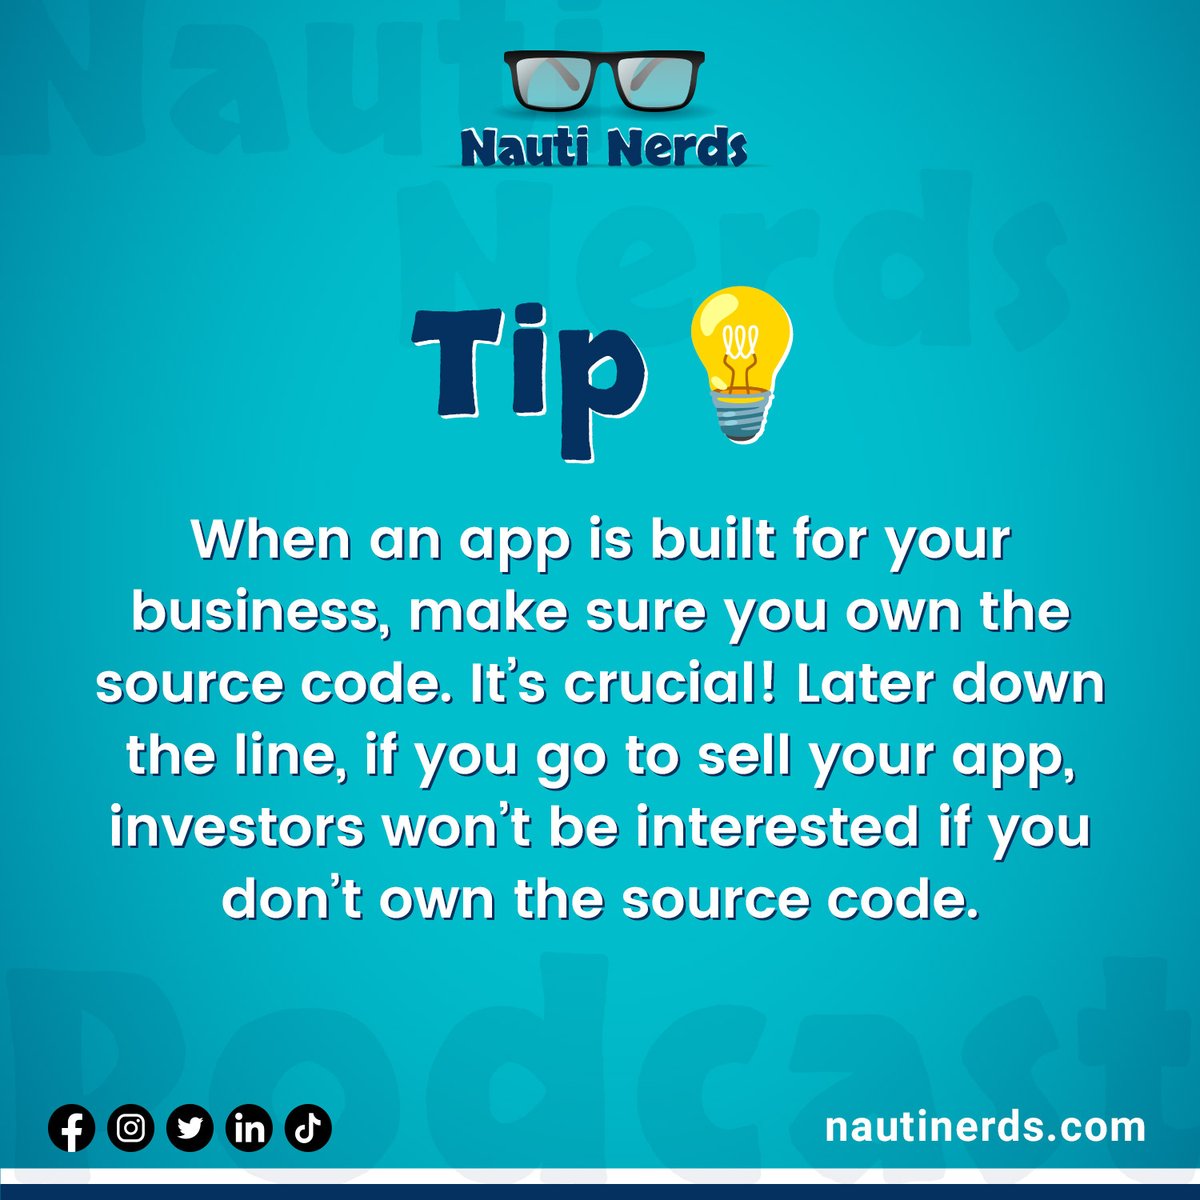 Have you considered creating an app for your business? 📲

🤓 Tune in for a nerd’s advice on “how to create a business app – cheaply”.  

Listen here: kite.link/Nauti-Nerds-bu…

#nautinerds #marketingpodcast #businessapp #digitalmarketingservices